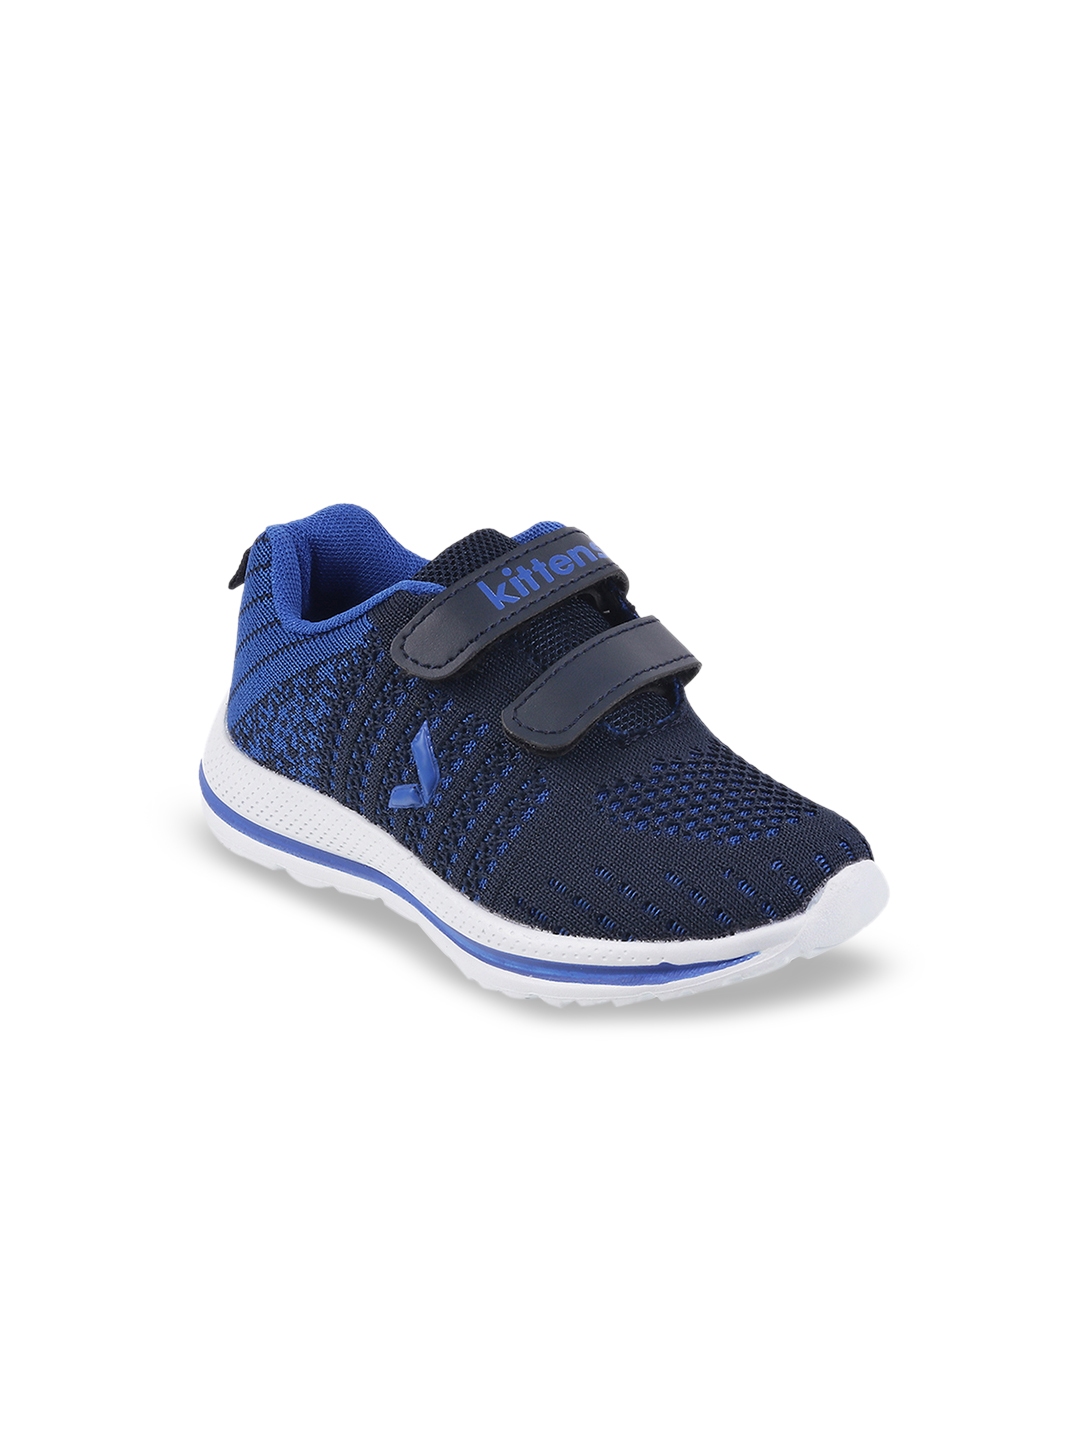 Buy Kittens Boys Blue Slip On Sneakers - Casual Shoes for Boys 10529272 ...